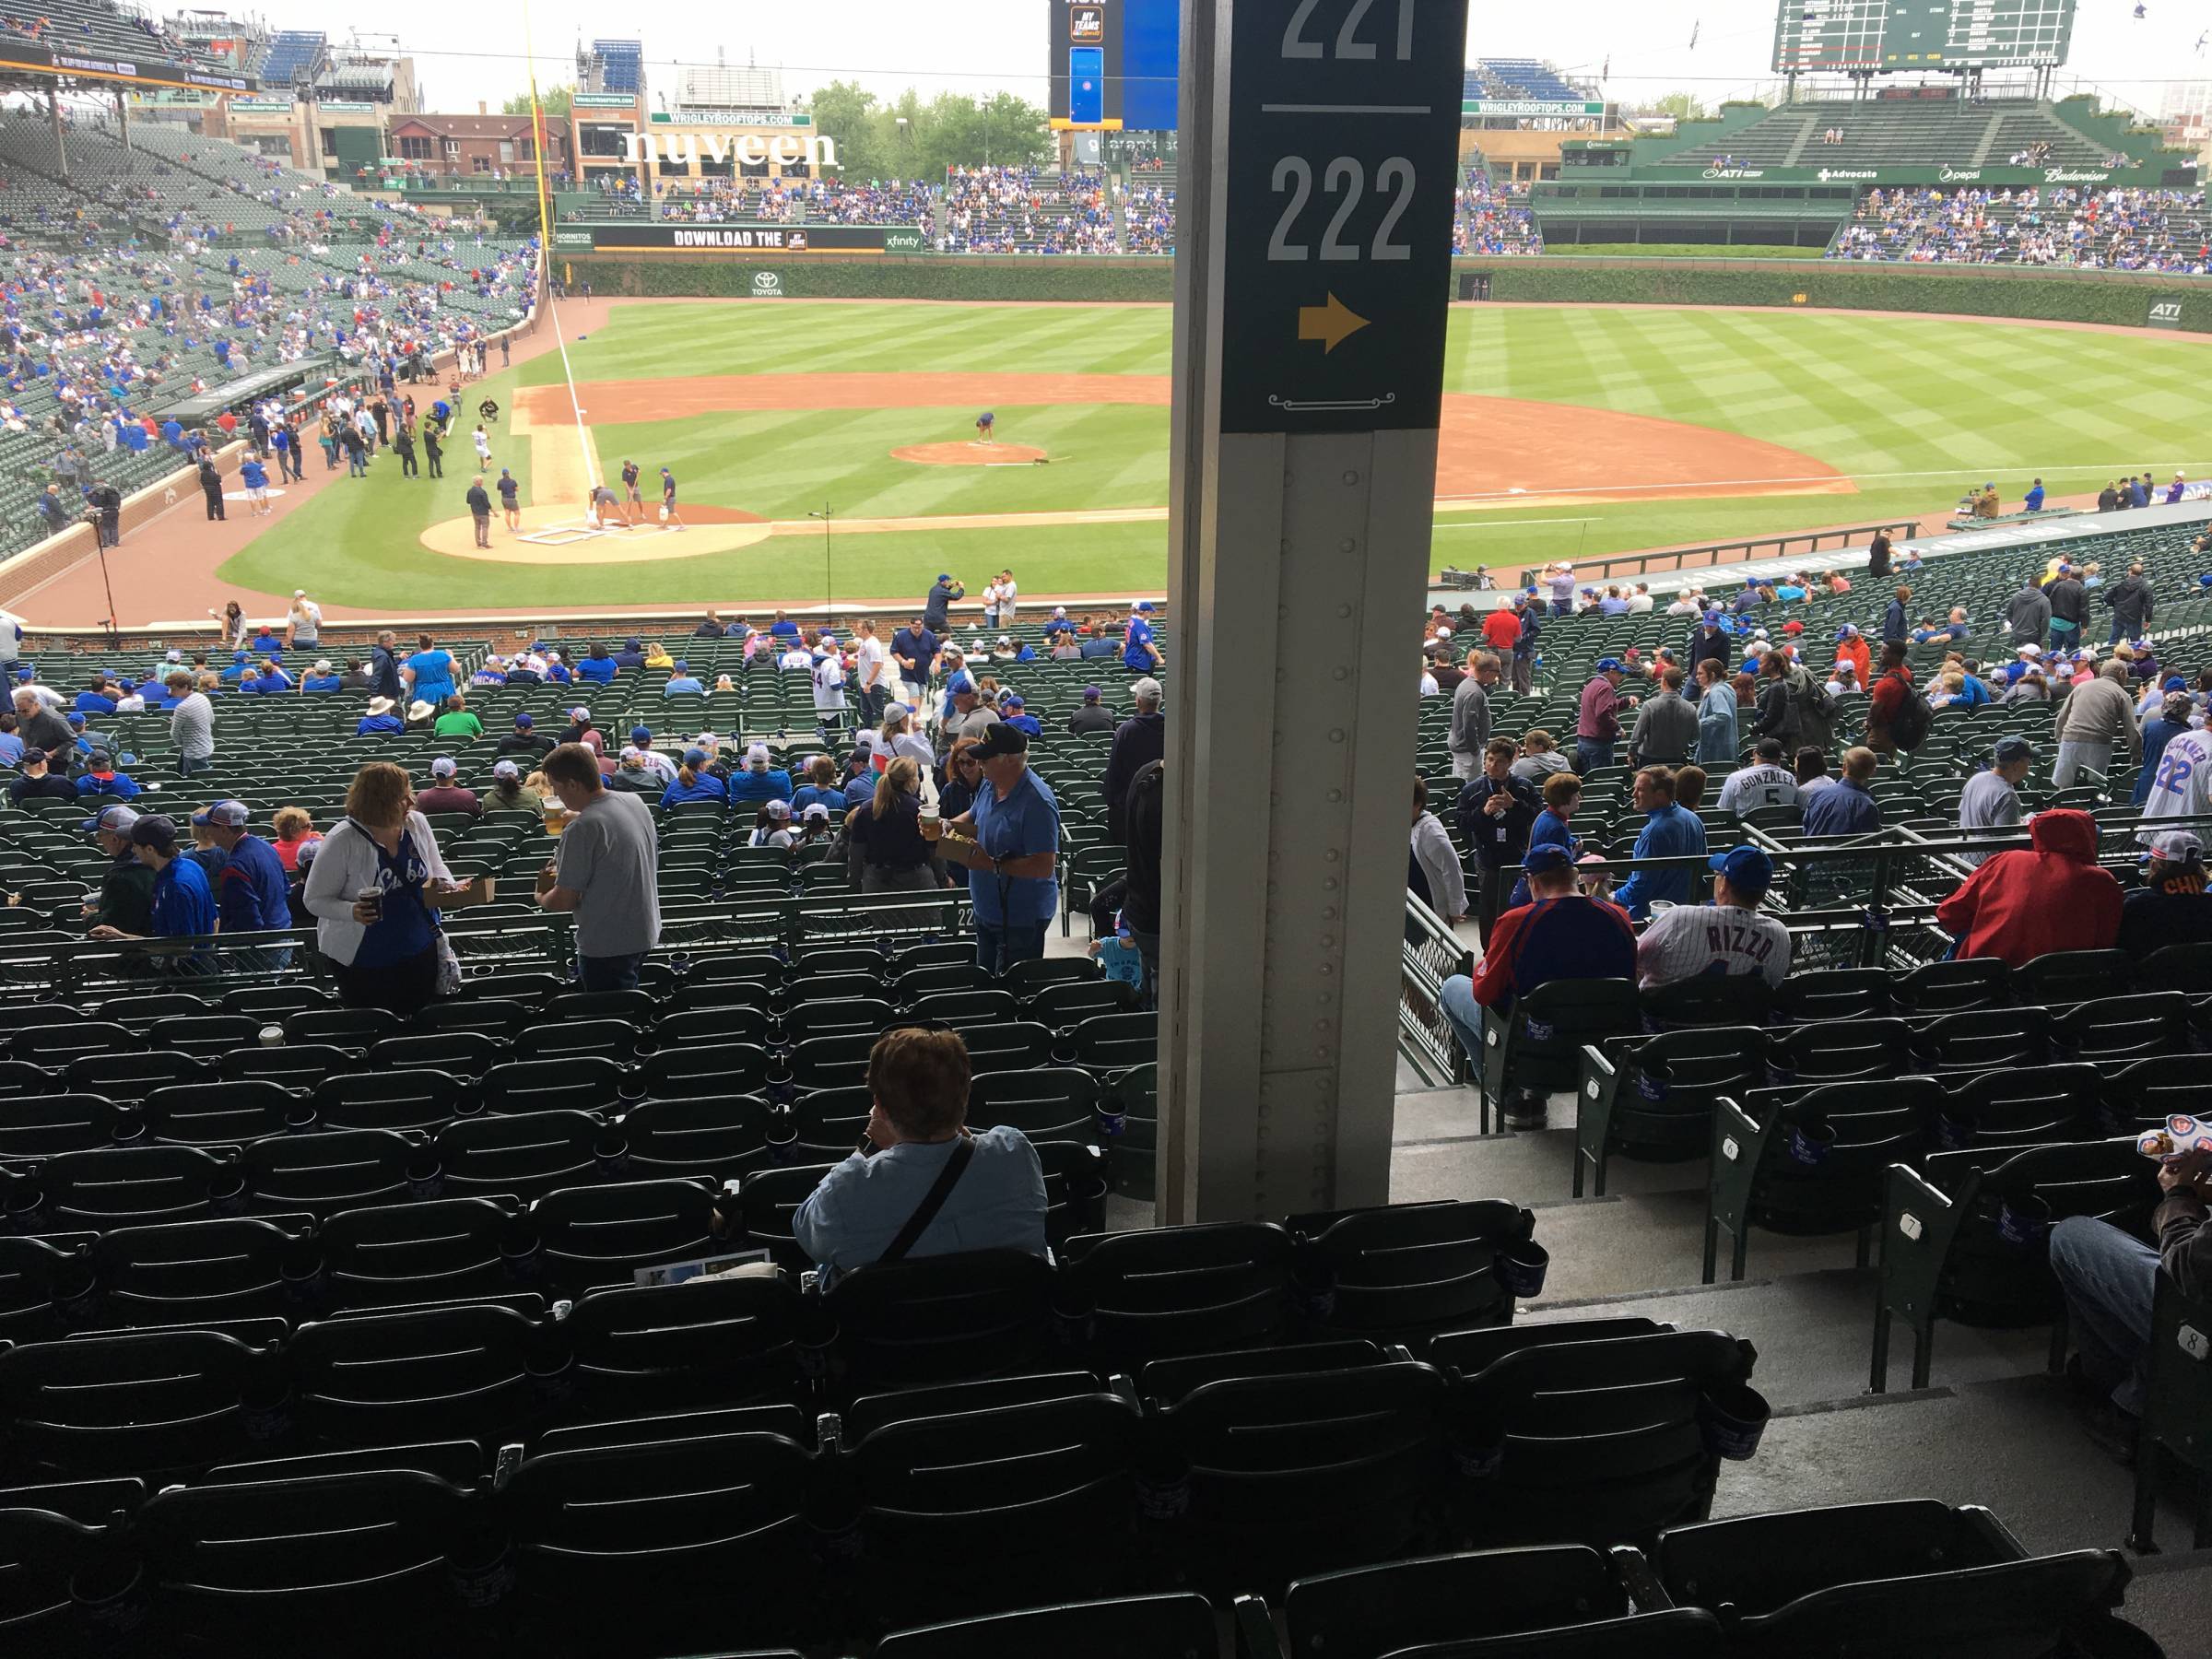 Pole in Section 221 at Wrigley Field